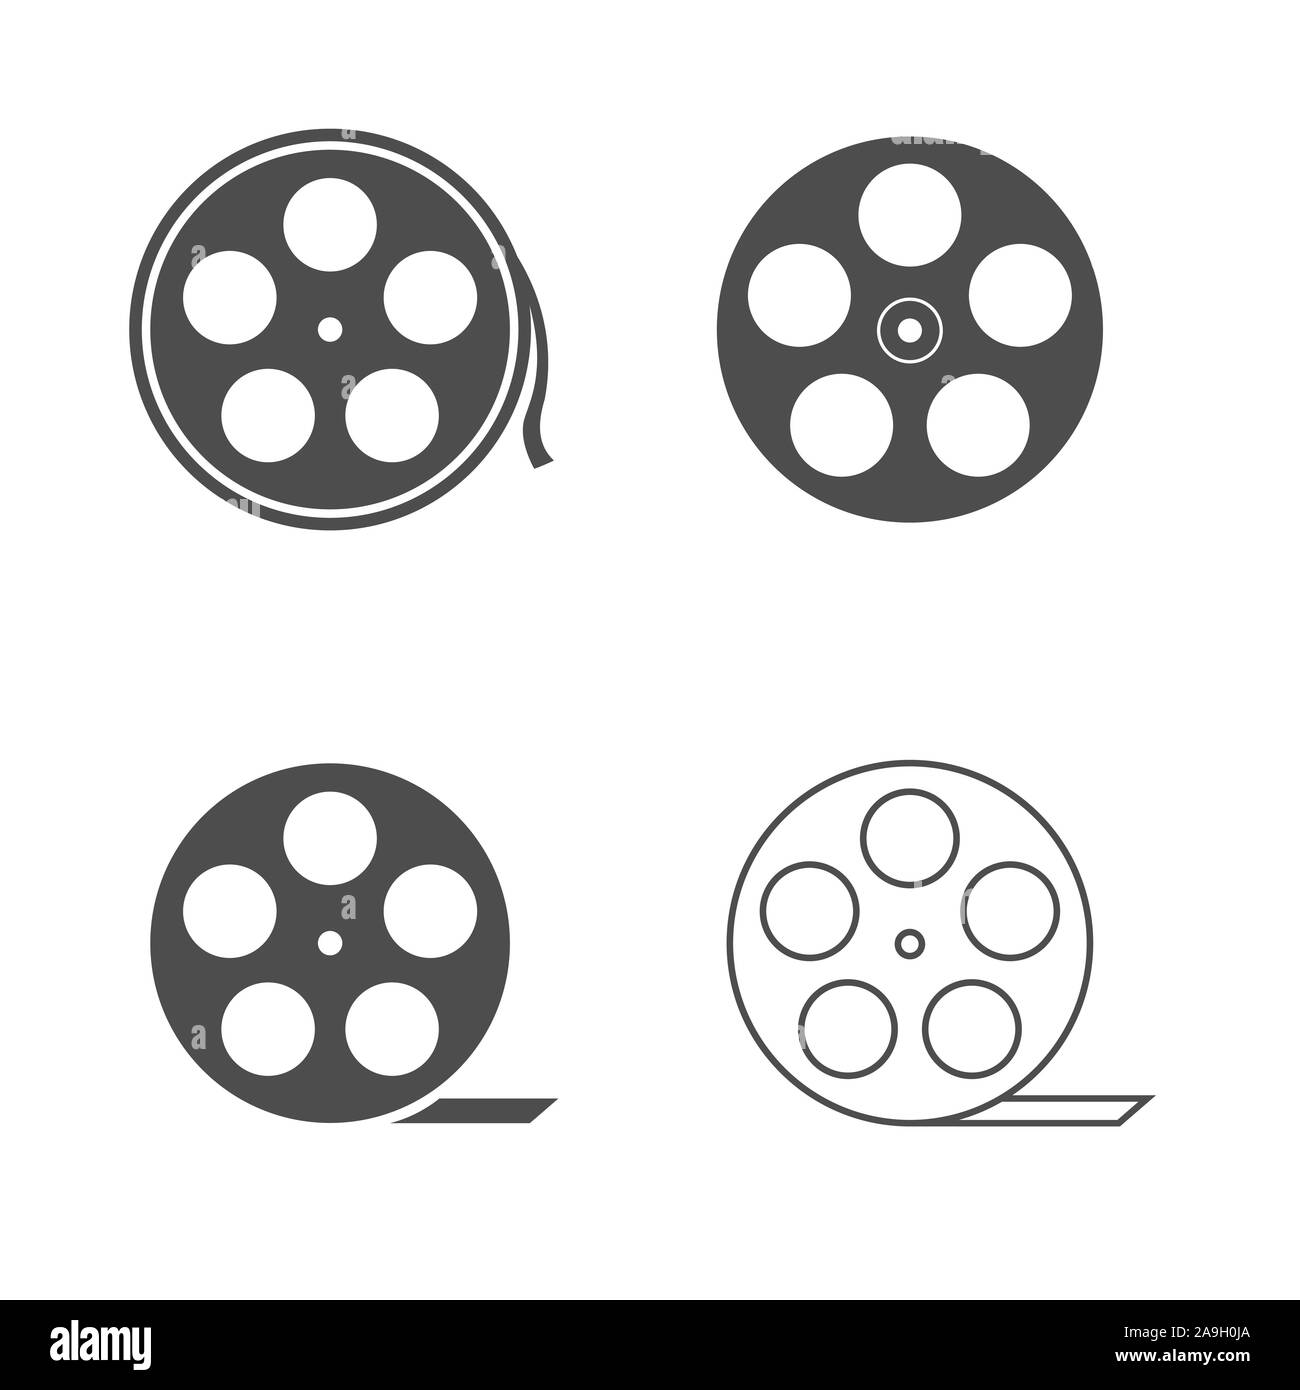 Reels icon vector vectors Black and White Stock Photos & Images